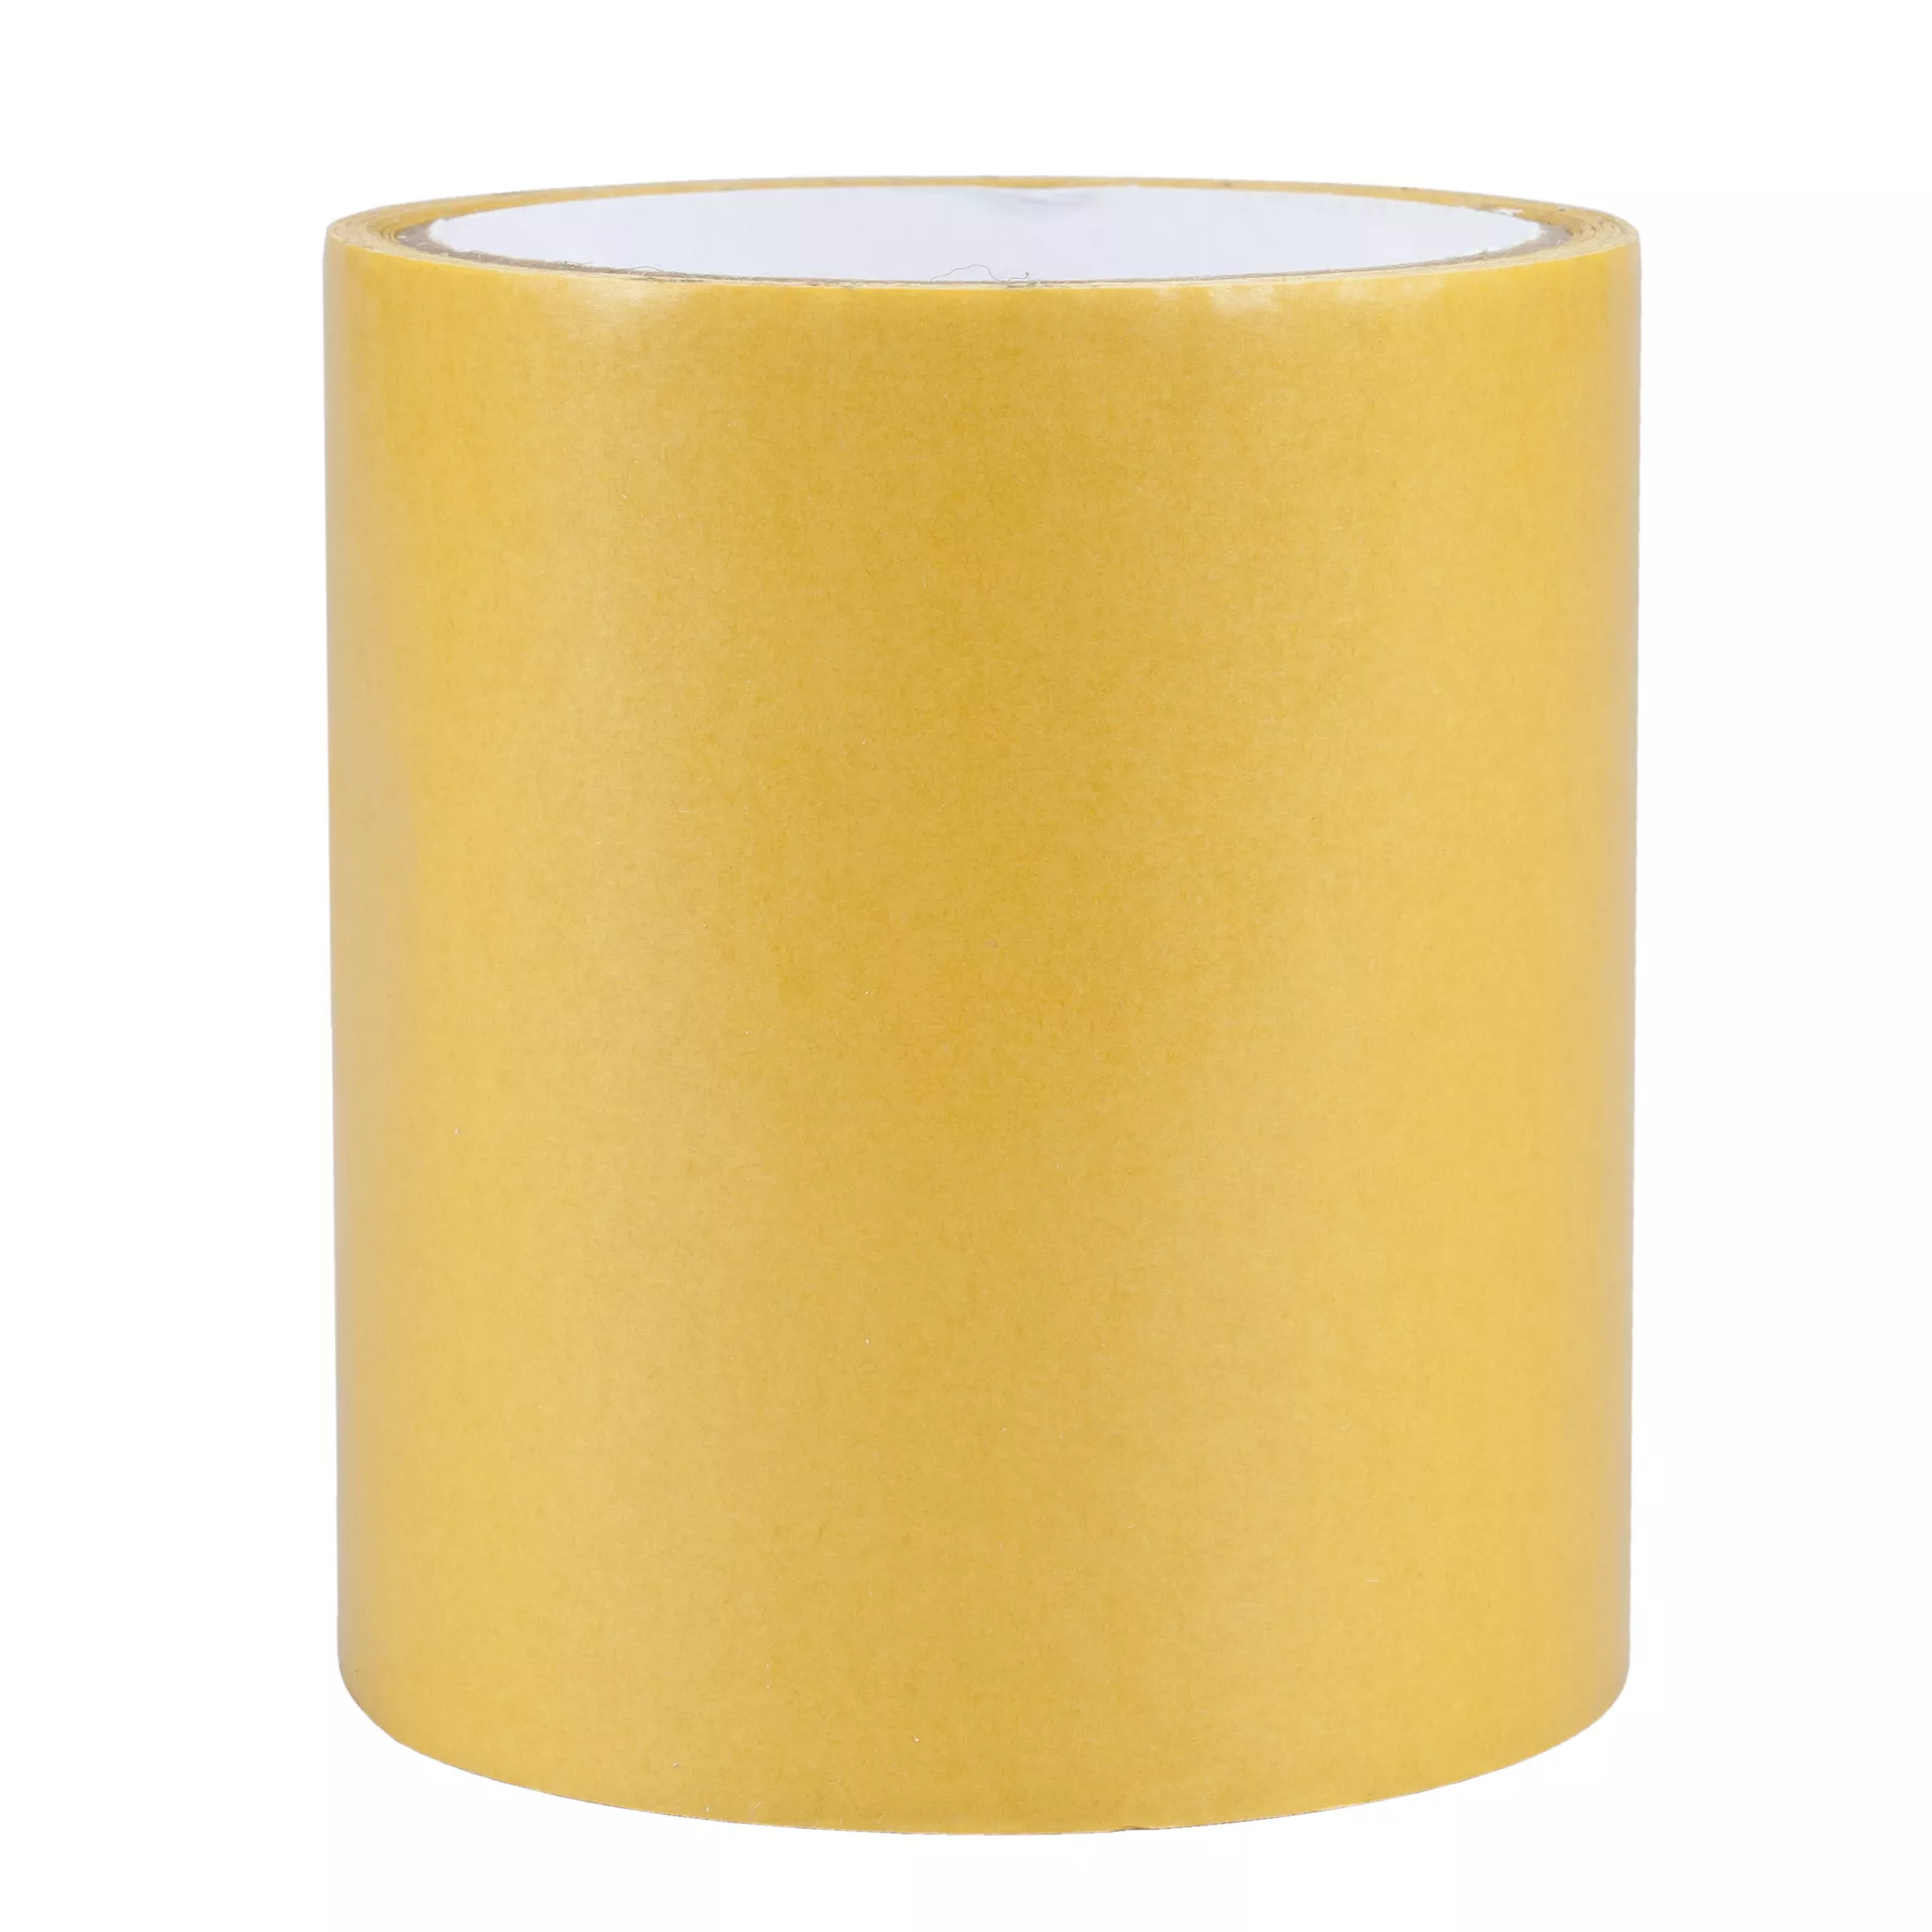 3M™ Scrim Reinforced Adhesive Transfer Tape 97053, Clear, 20 in x 250
yd, 2.5 mil, 1 Roll/Case